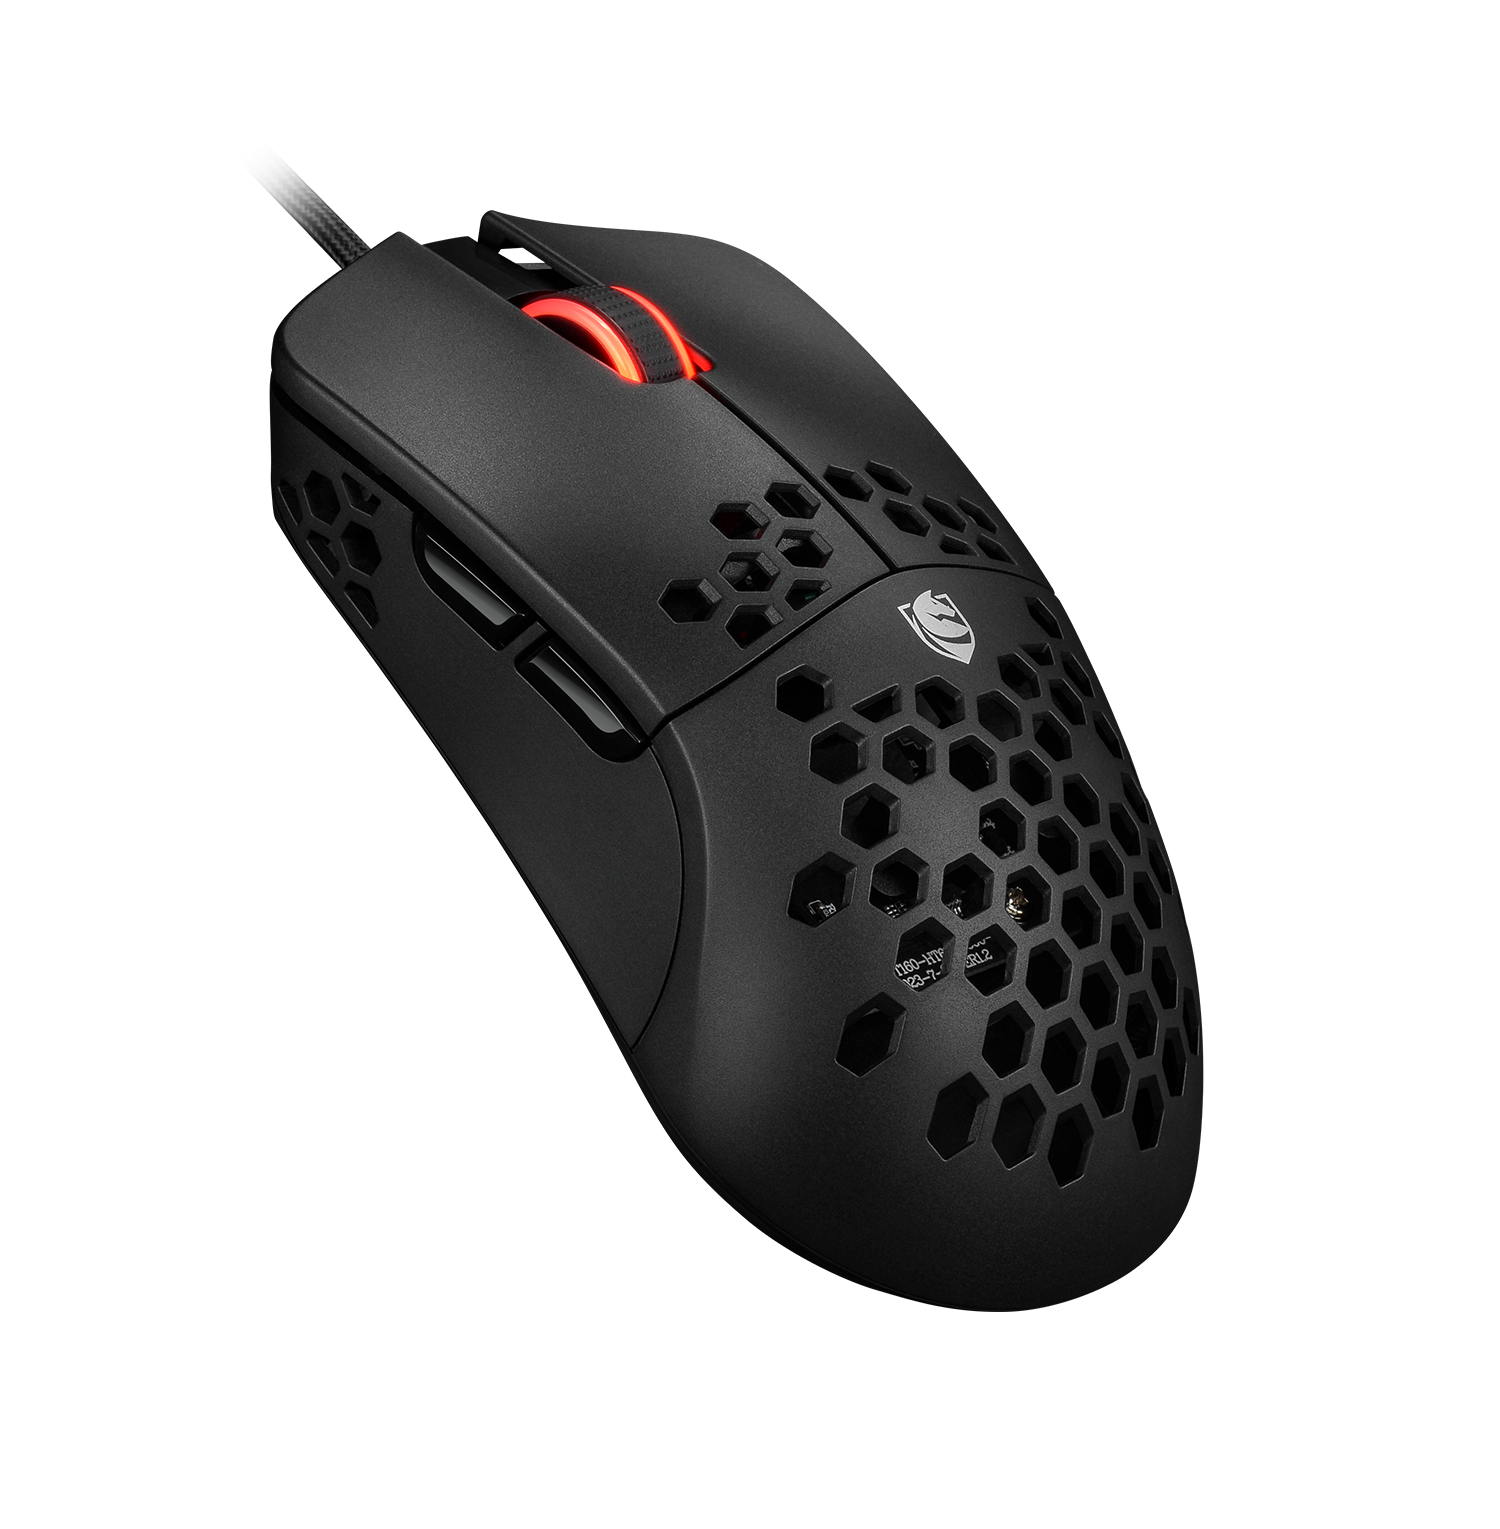 BALIOS Gaming Mouse